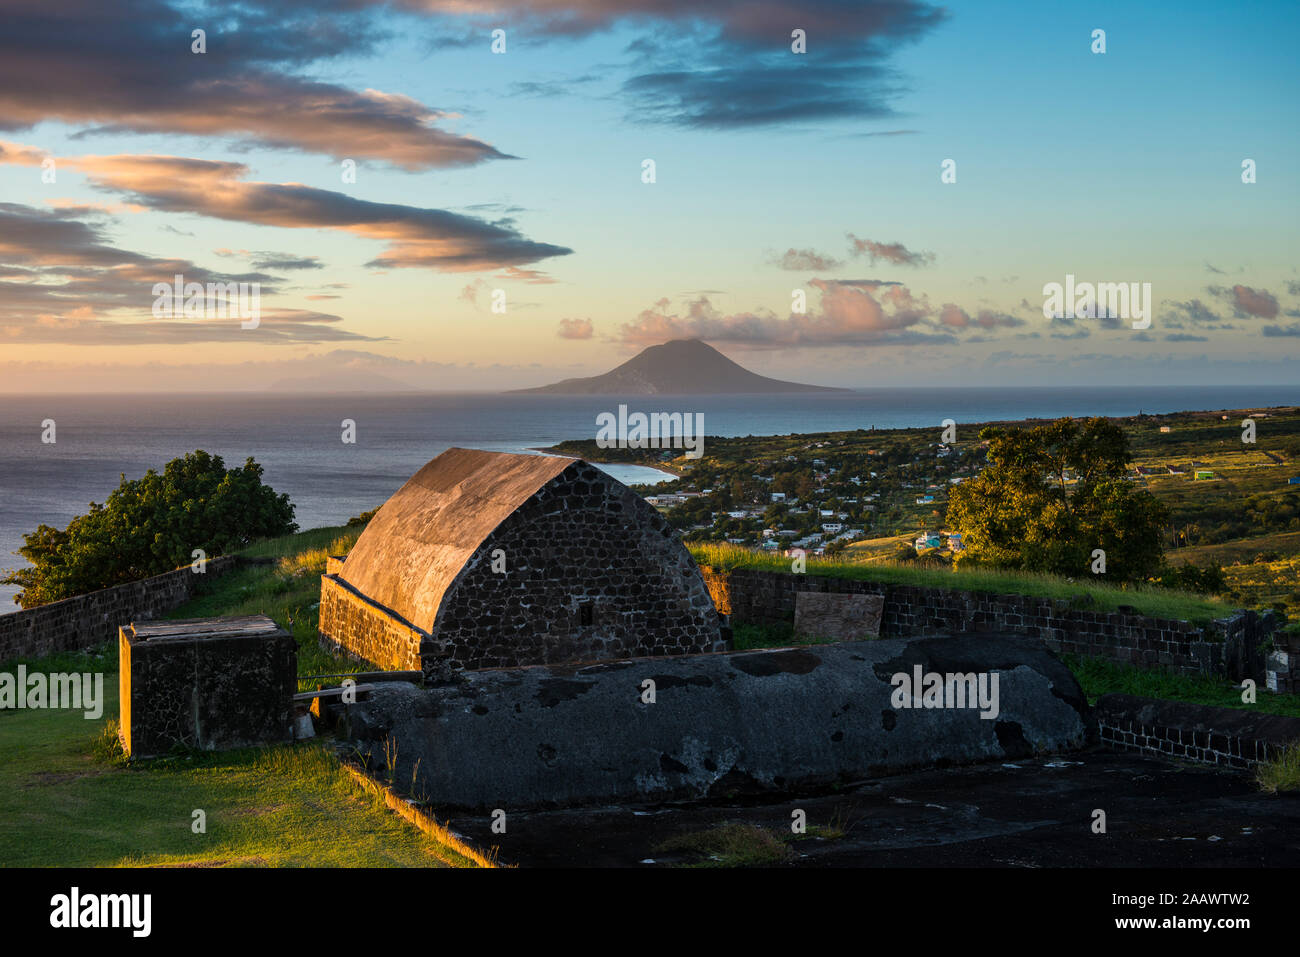 St. Eustatius seen from Brimstone hill fortress, St. Kitts and Nevis, Caribbean Stock Photo